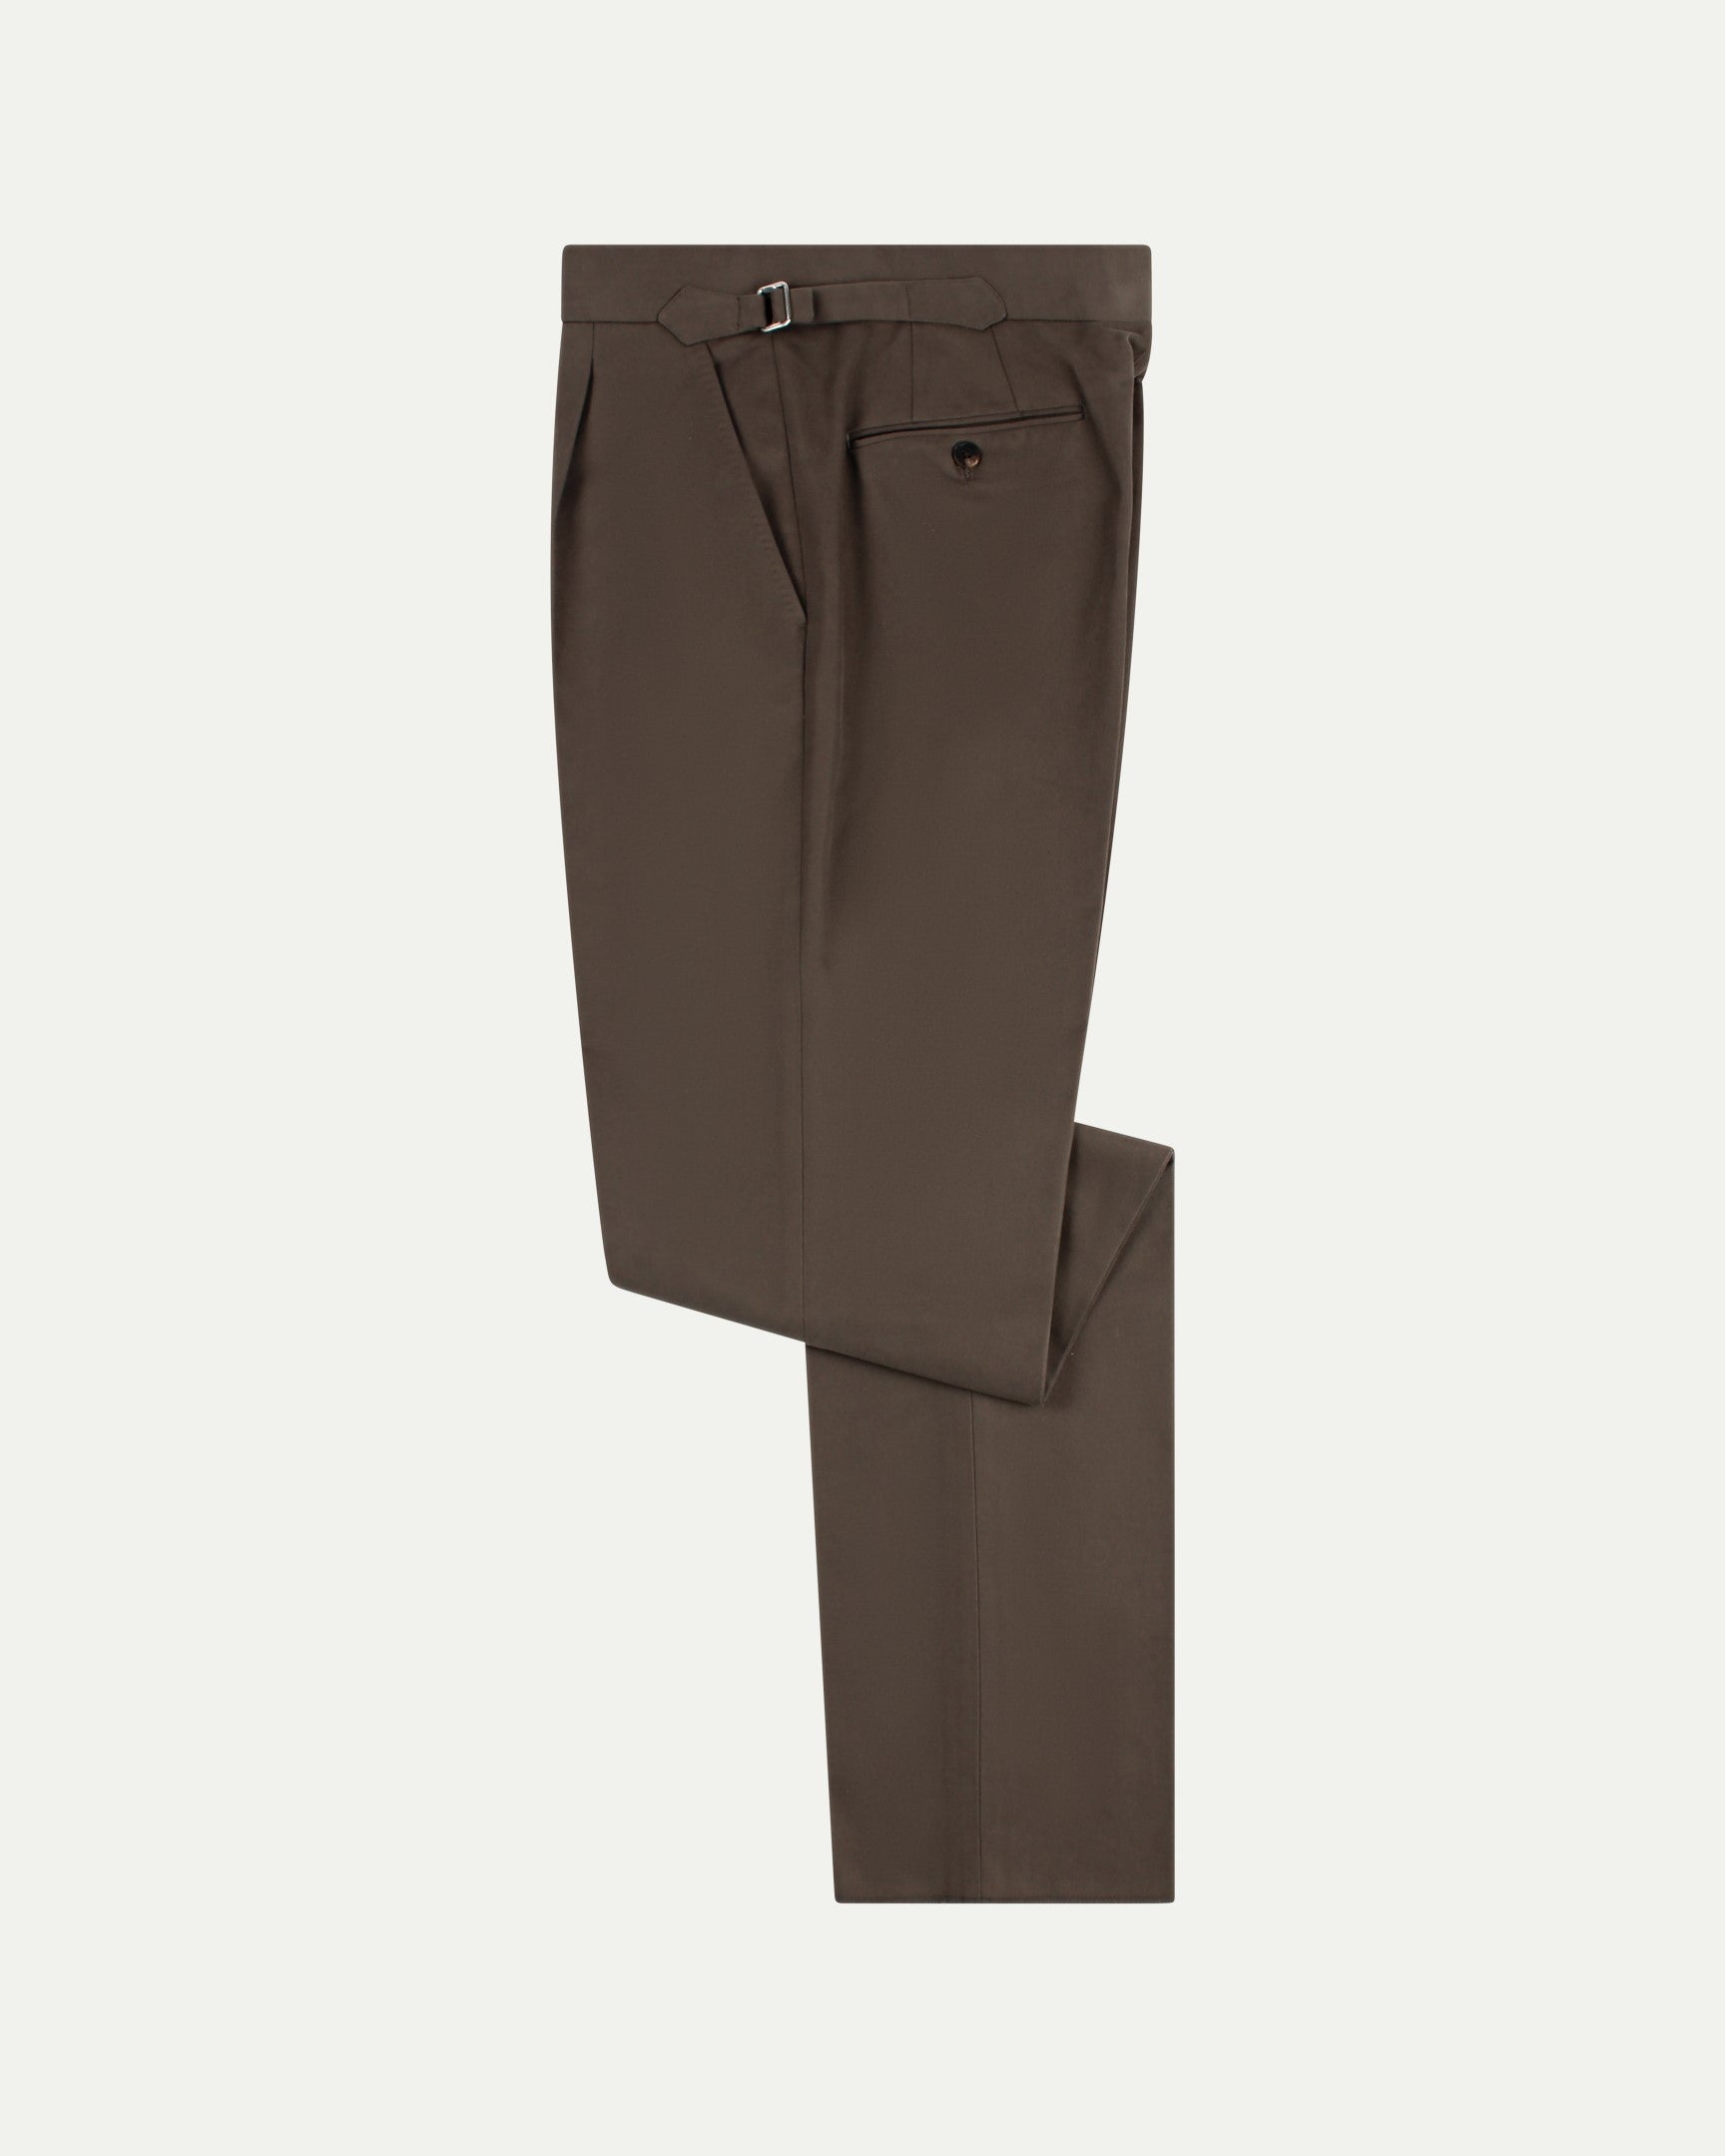 Made-To-Order Trousers in Tobacco Cotton Drill